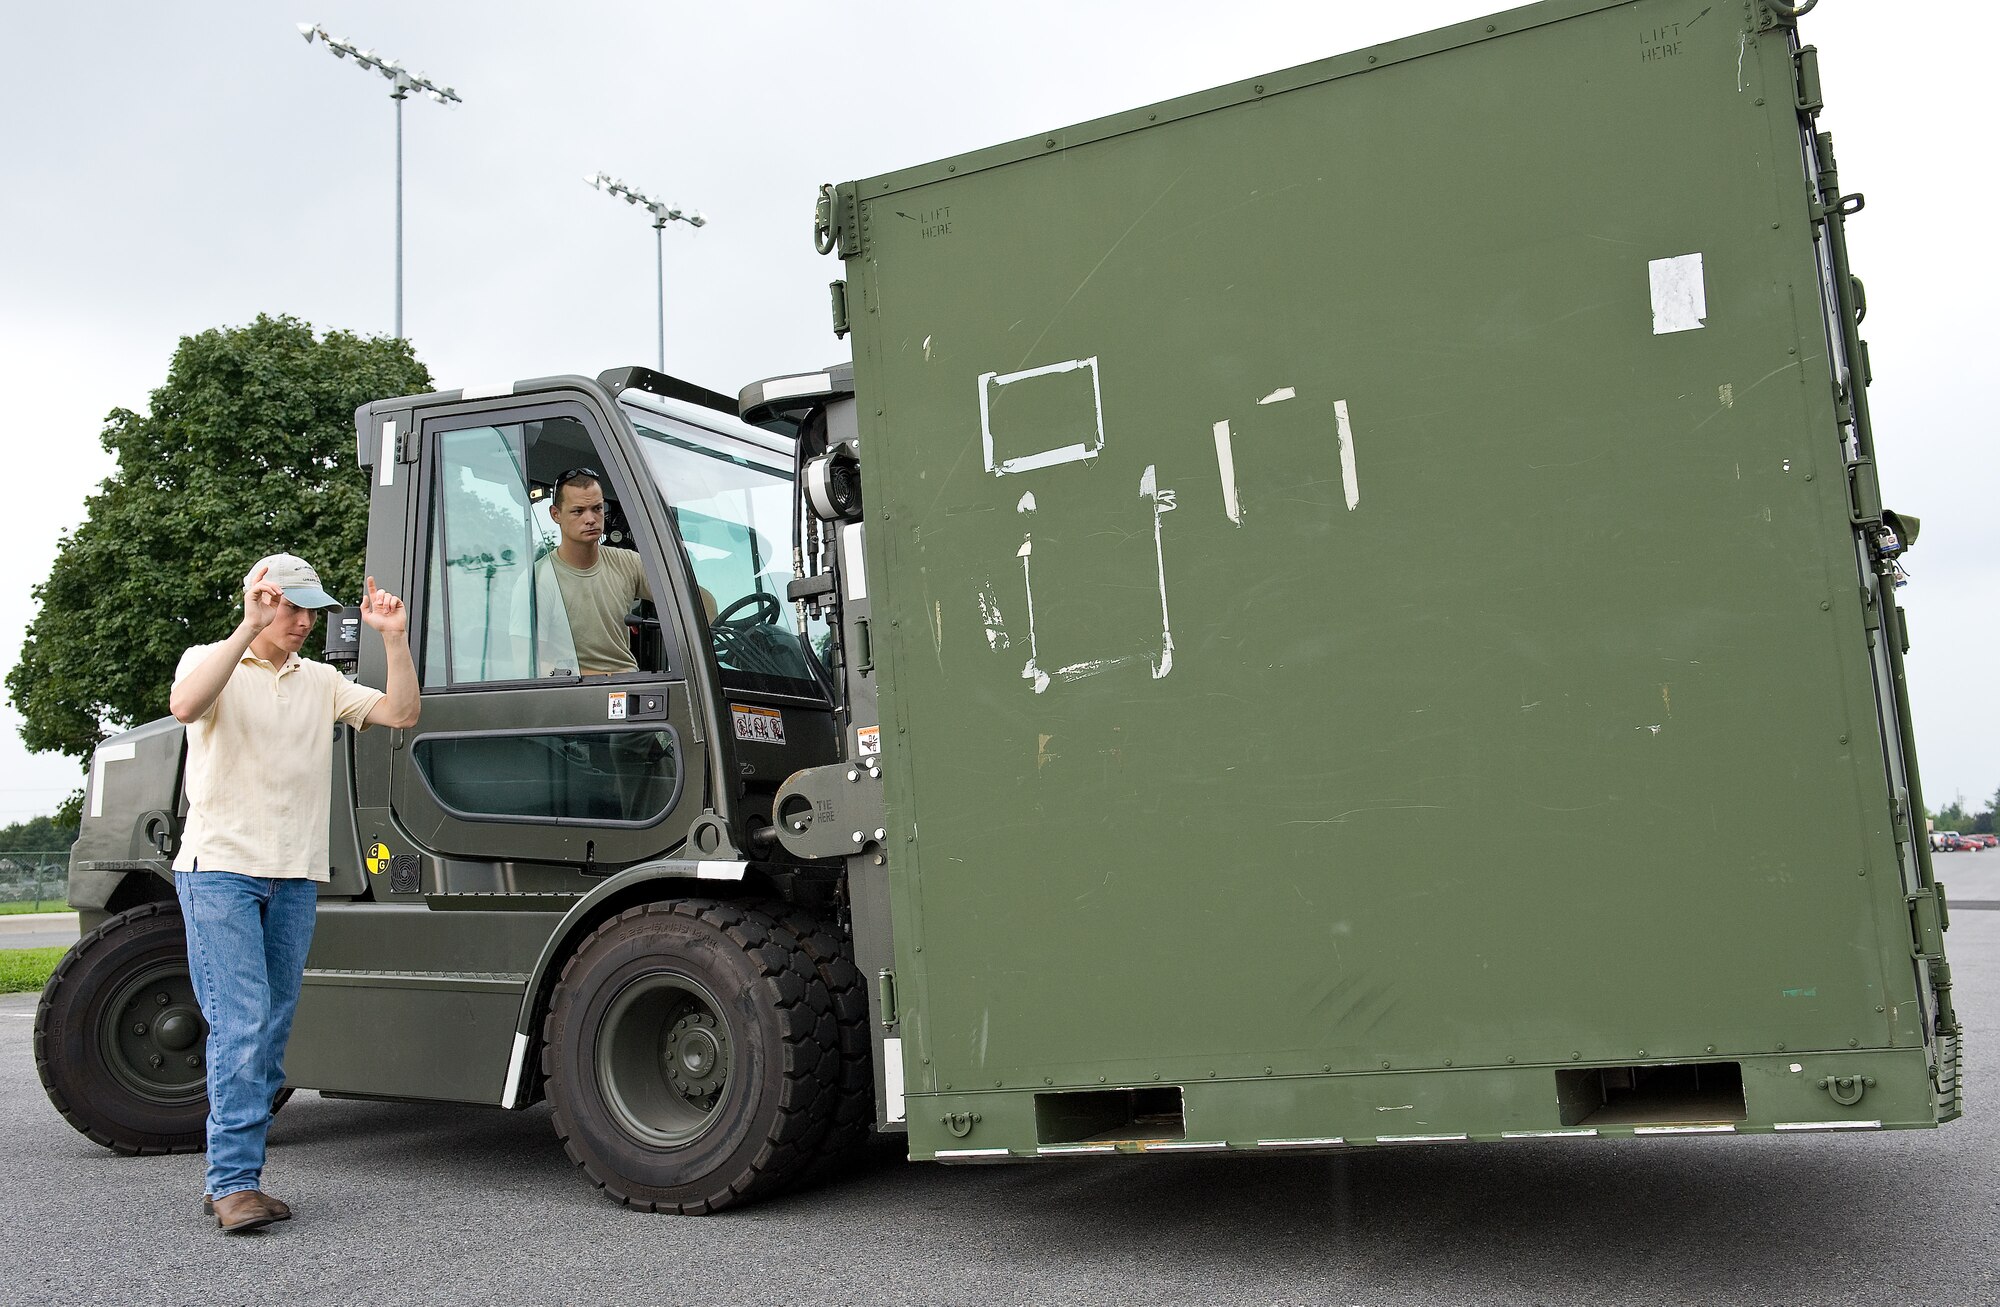 Staff Sgt. Benjamin Putnam, 436th Operations Support Squadron, marshalls Senior Airman Mitchell Scott, 436th Civil Engineer Squadron, as he moves a equipment container into a storage facility Aug. 25, 2011, on Dover Air Force Base, Del. All items normally stored outside were placed in buildings and aircraft hangars in preparation for the arrival of Hurricane Irene. (U.S. Air Force photo by Roland Balik)